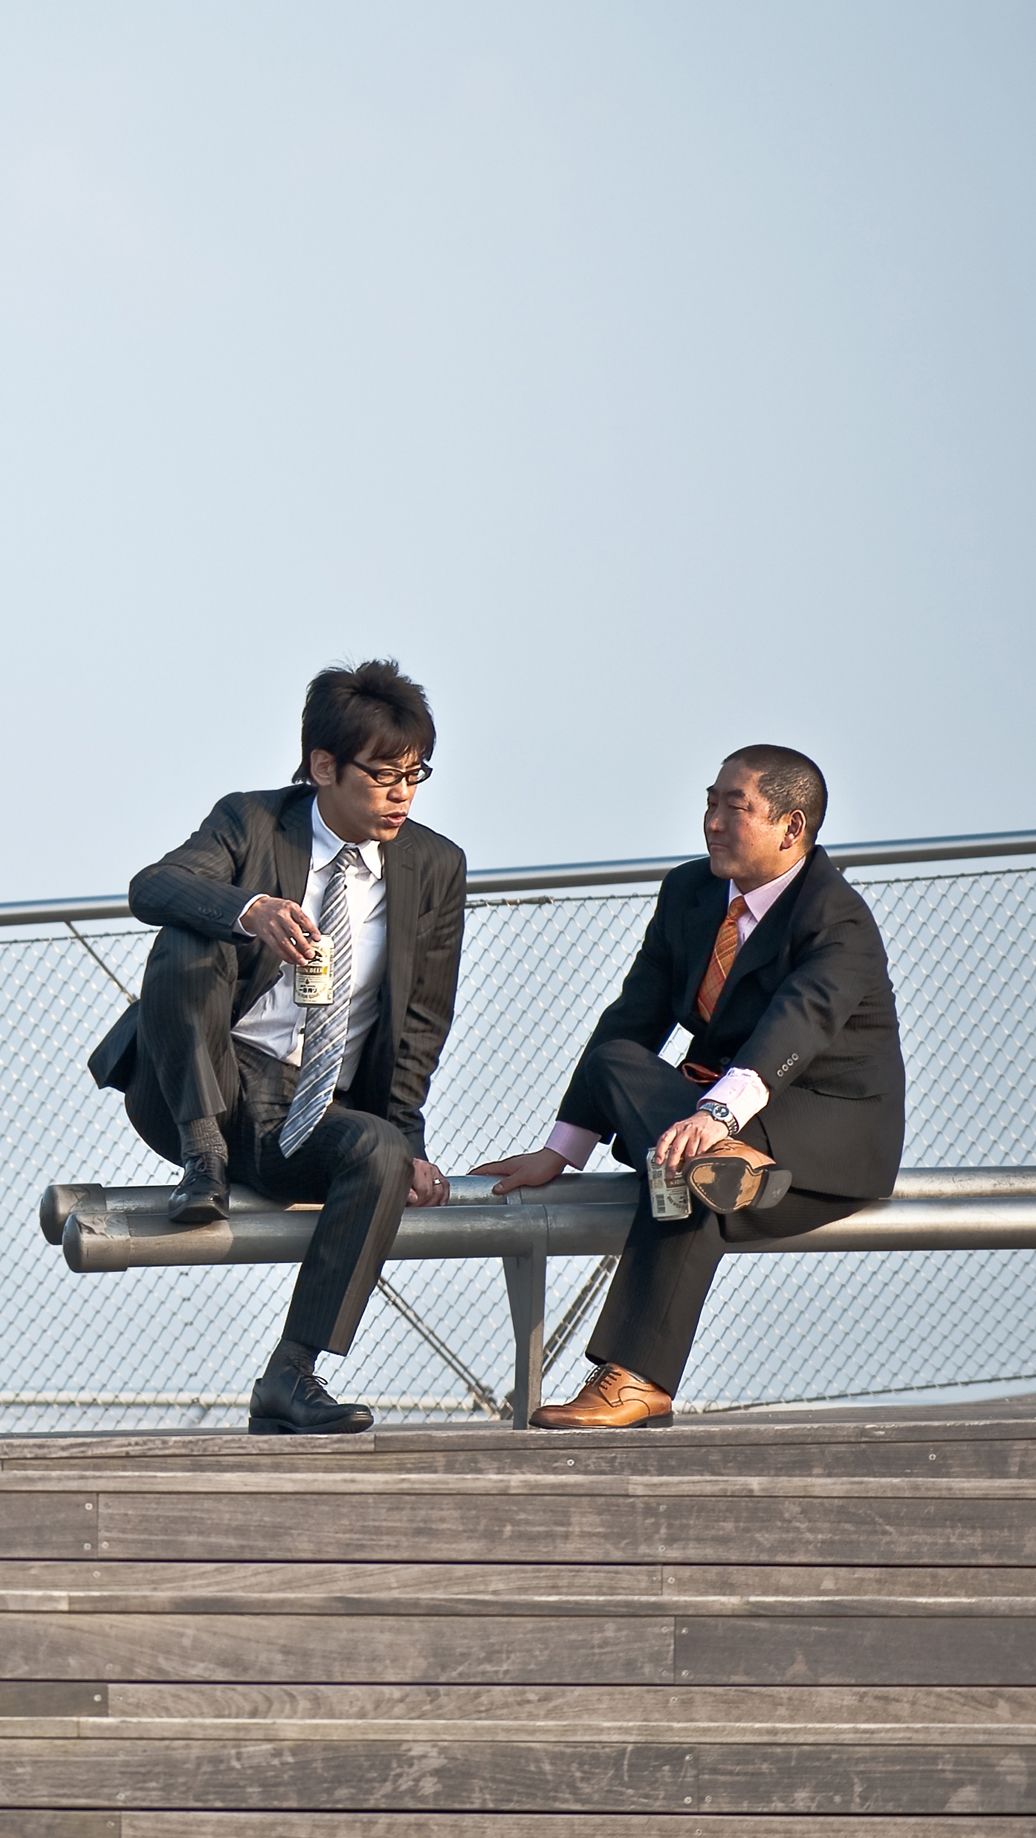 How Japans Salaryman is becoming cool pic